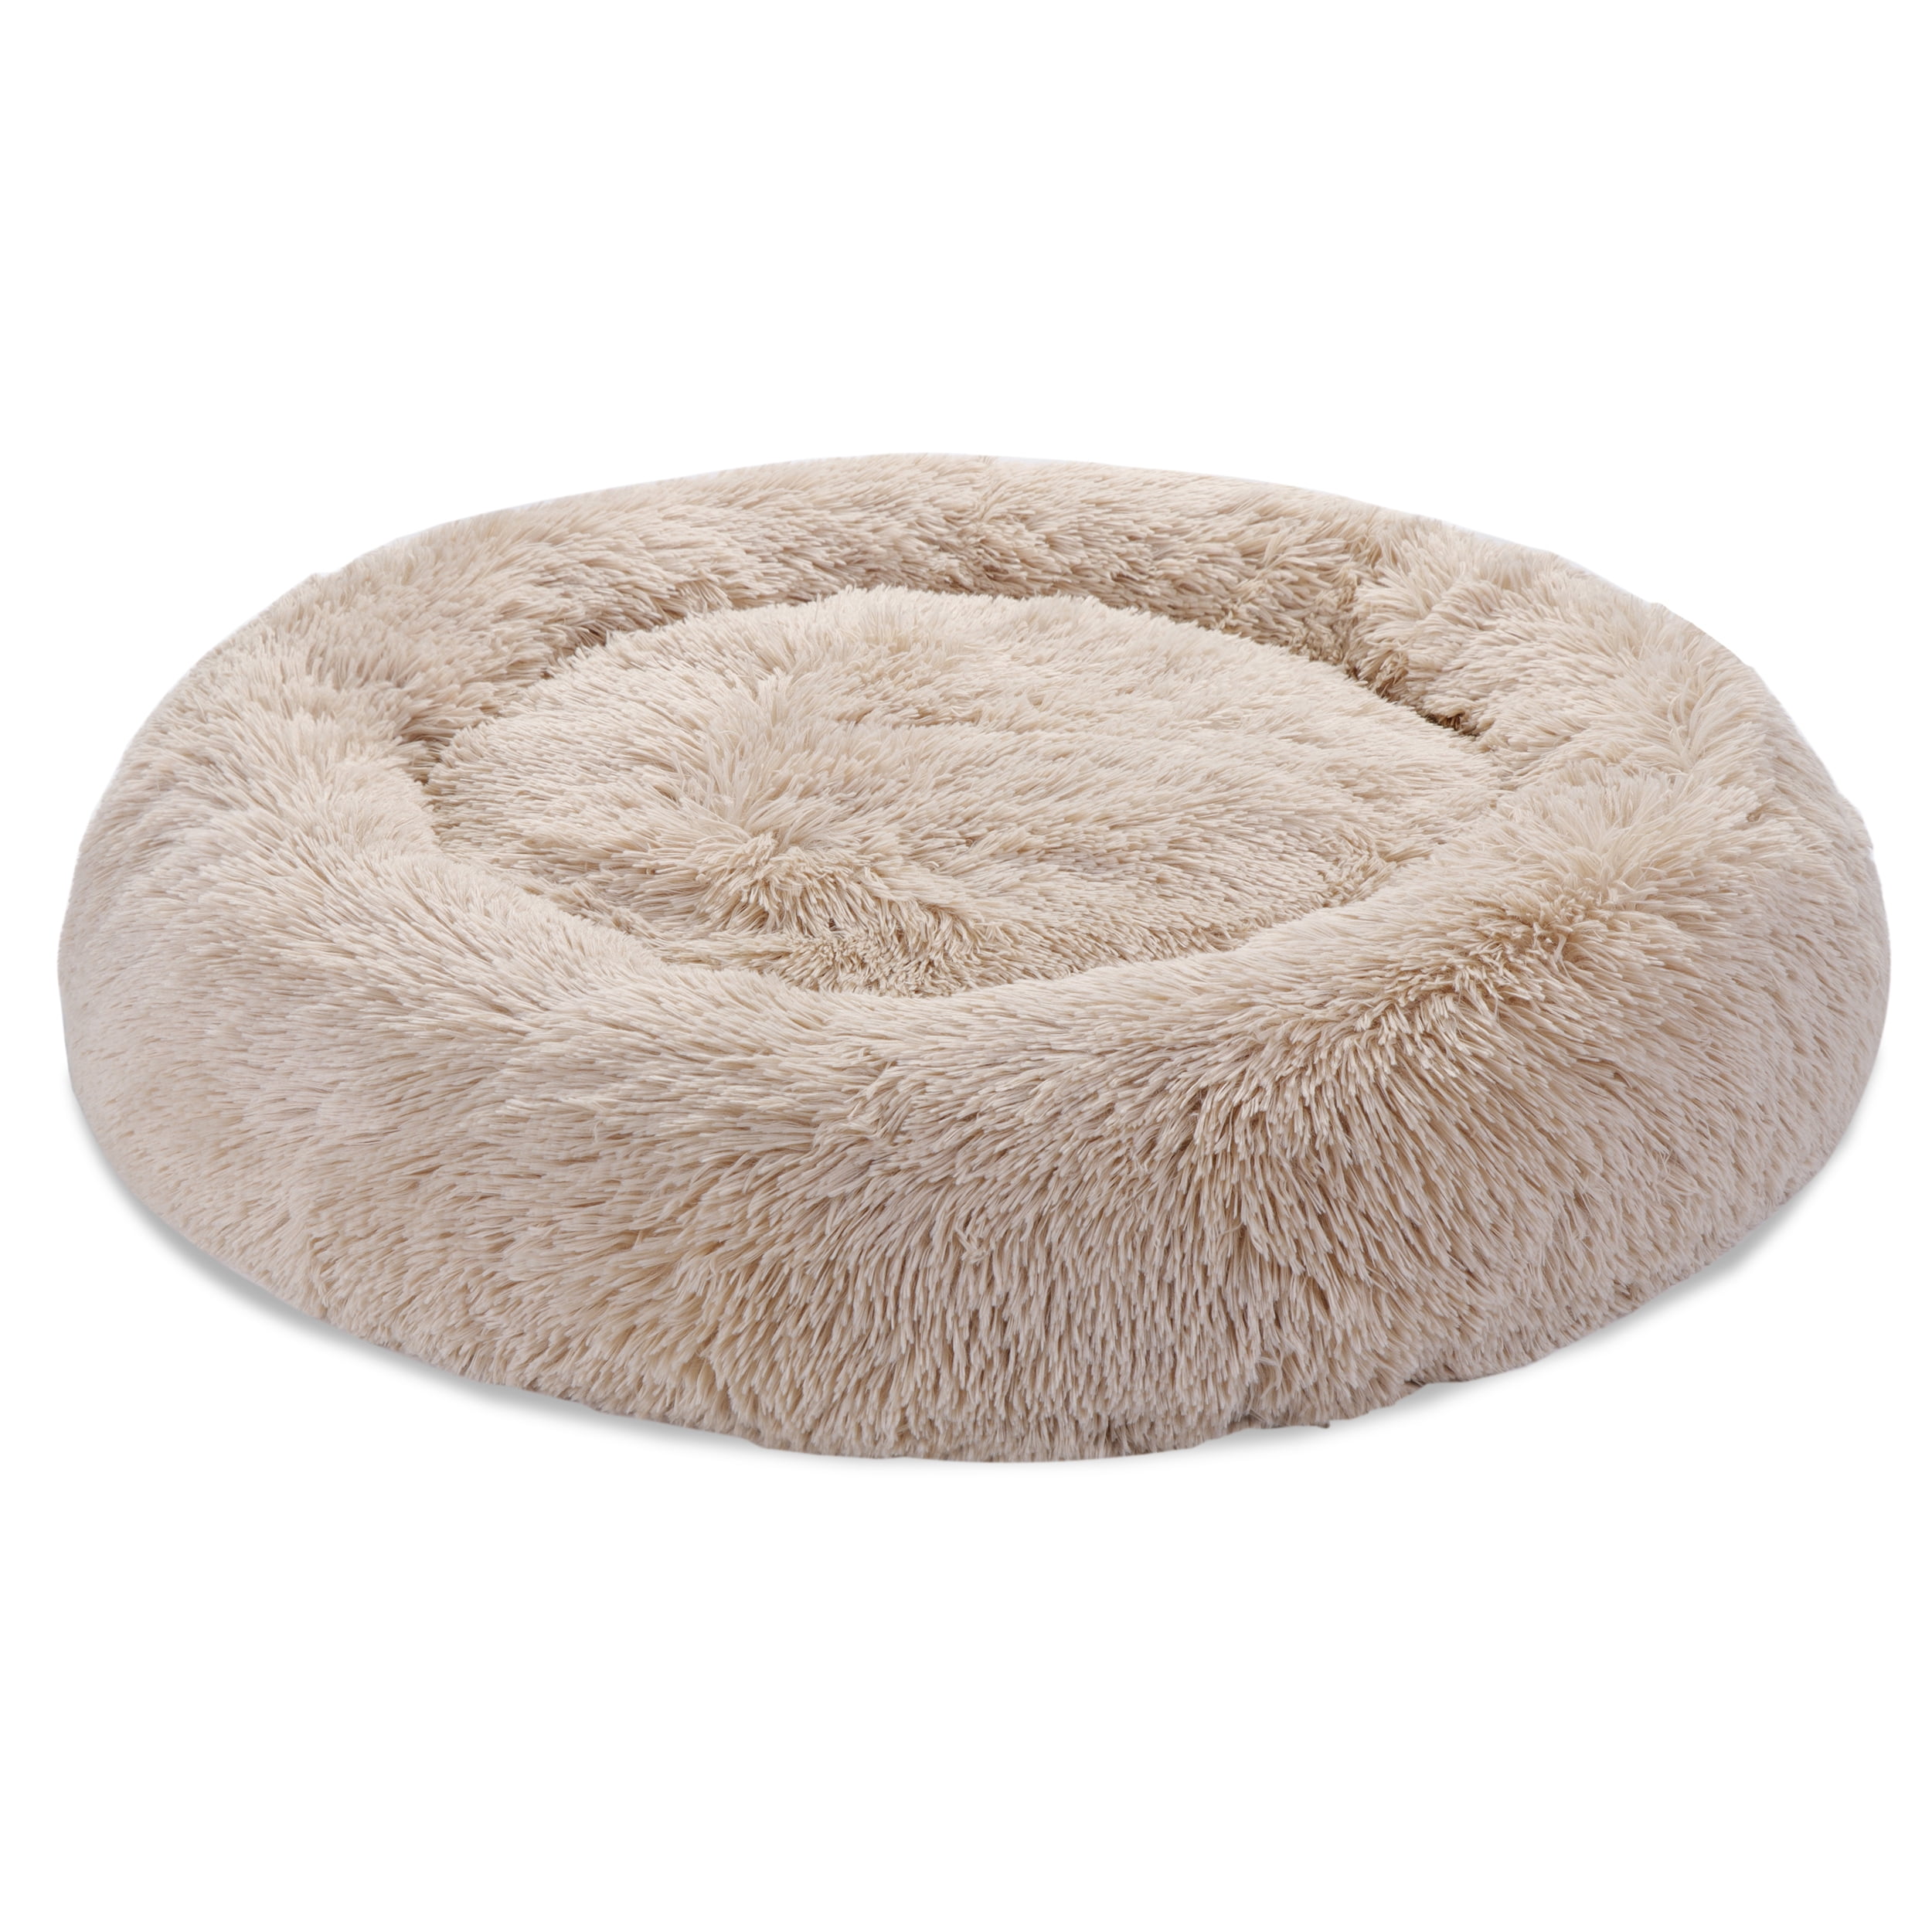 Extremely Soft Warming Machine Washable Cat Pet Bed with PP Cotton Filler JMHUND Dog Bed for Small/Medium/Large Dogs 